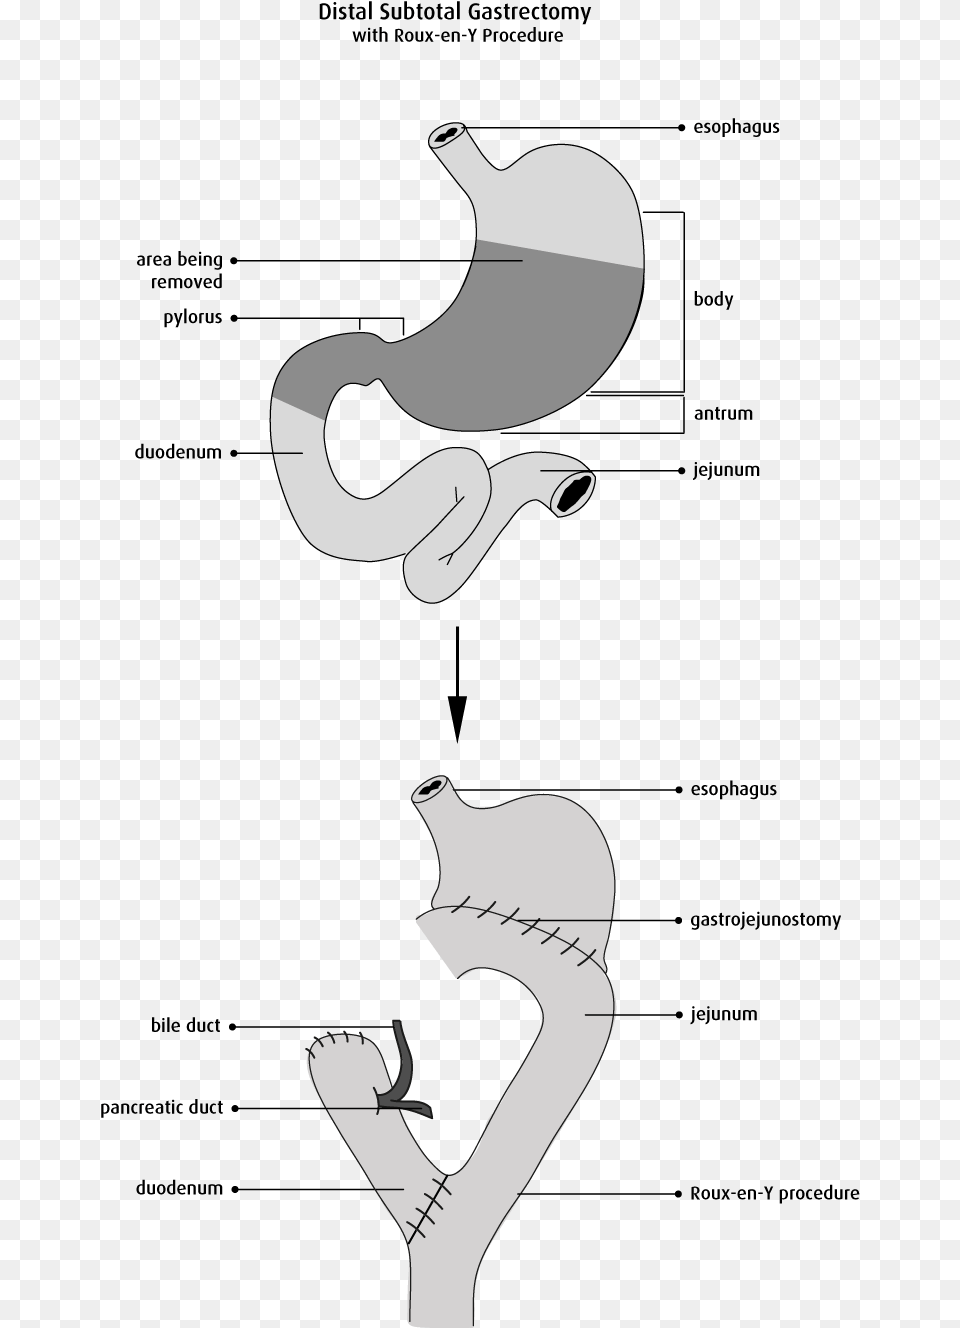 The Bile Duct Is Moved To Enter The Remaining Part Totally Laparoscopic Distal Gastrectomy, Lighter, Baby, Person Png